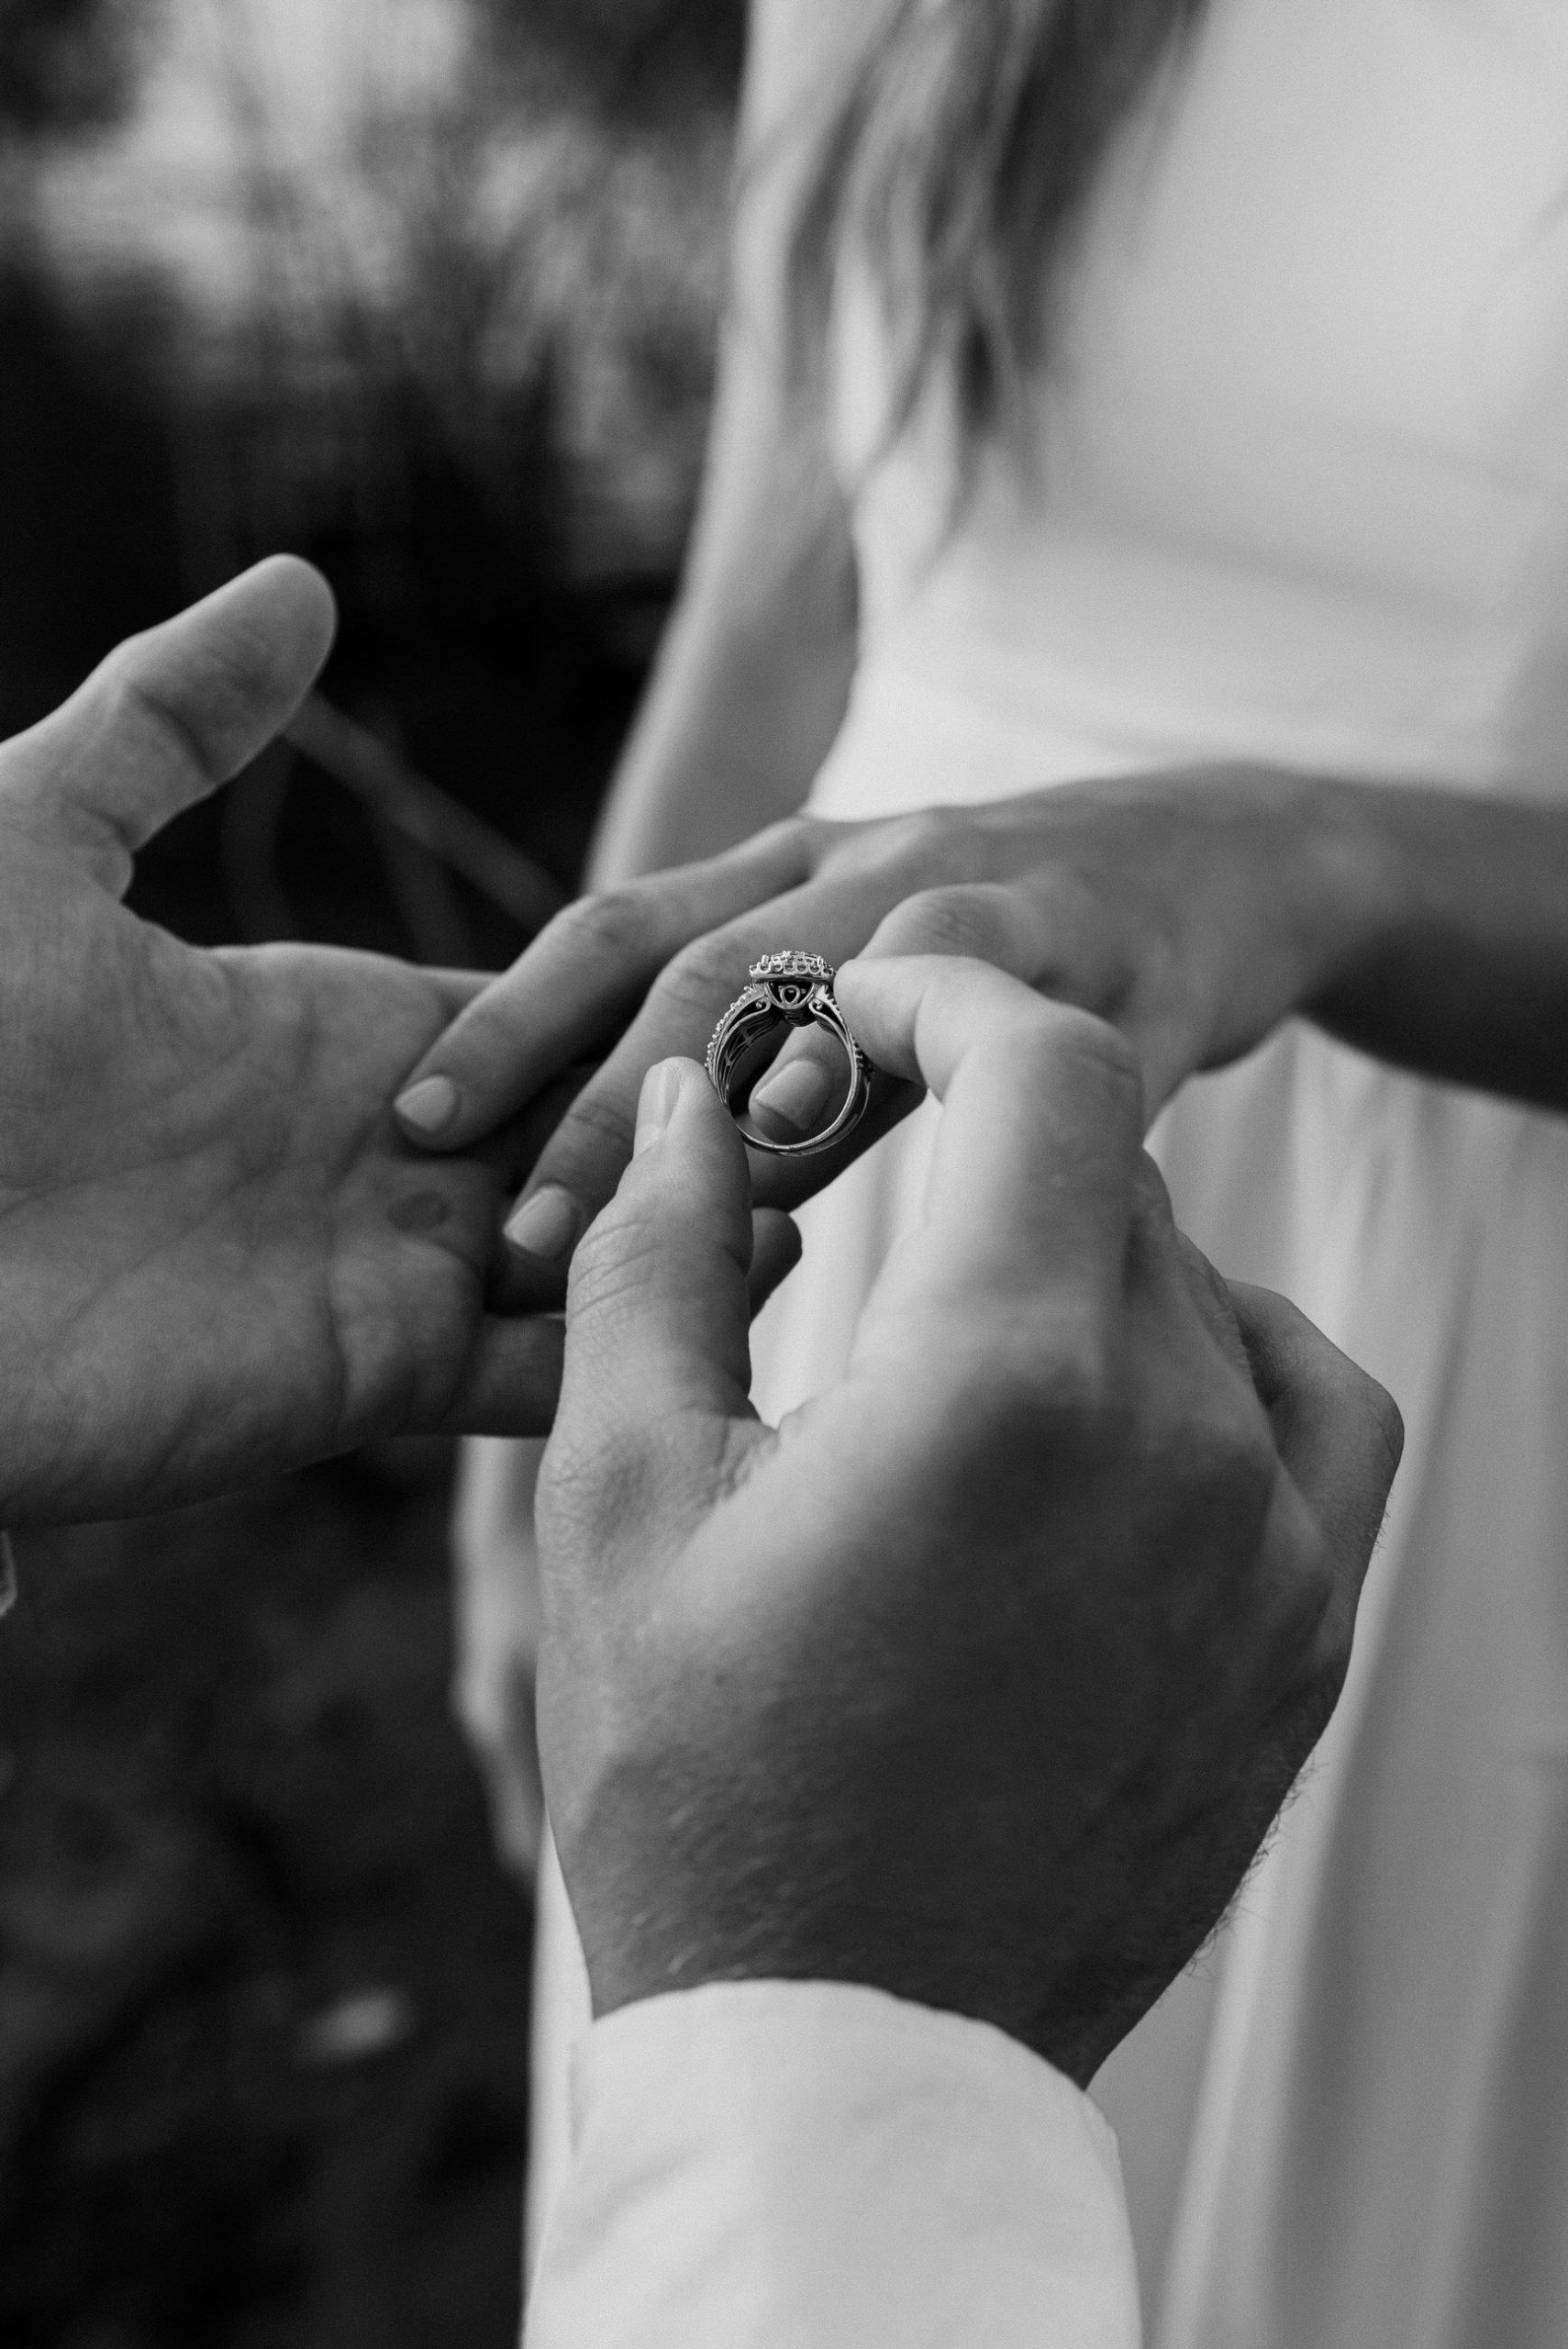 A beautiful elopement ceremony as couple exchanges rings.